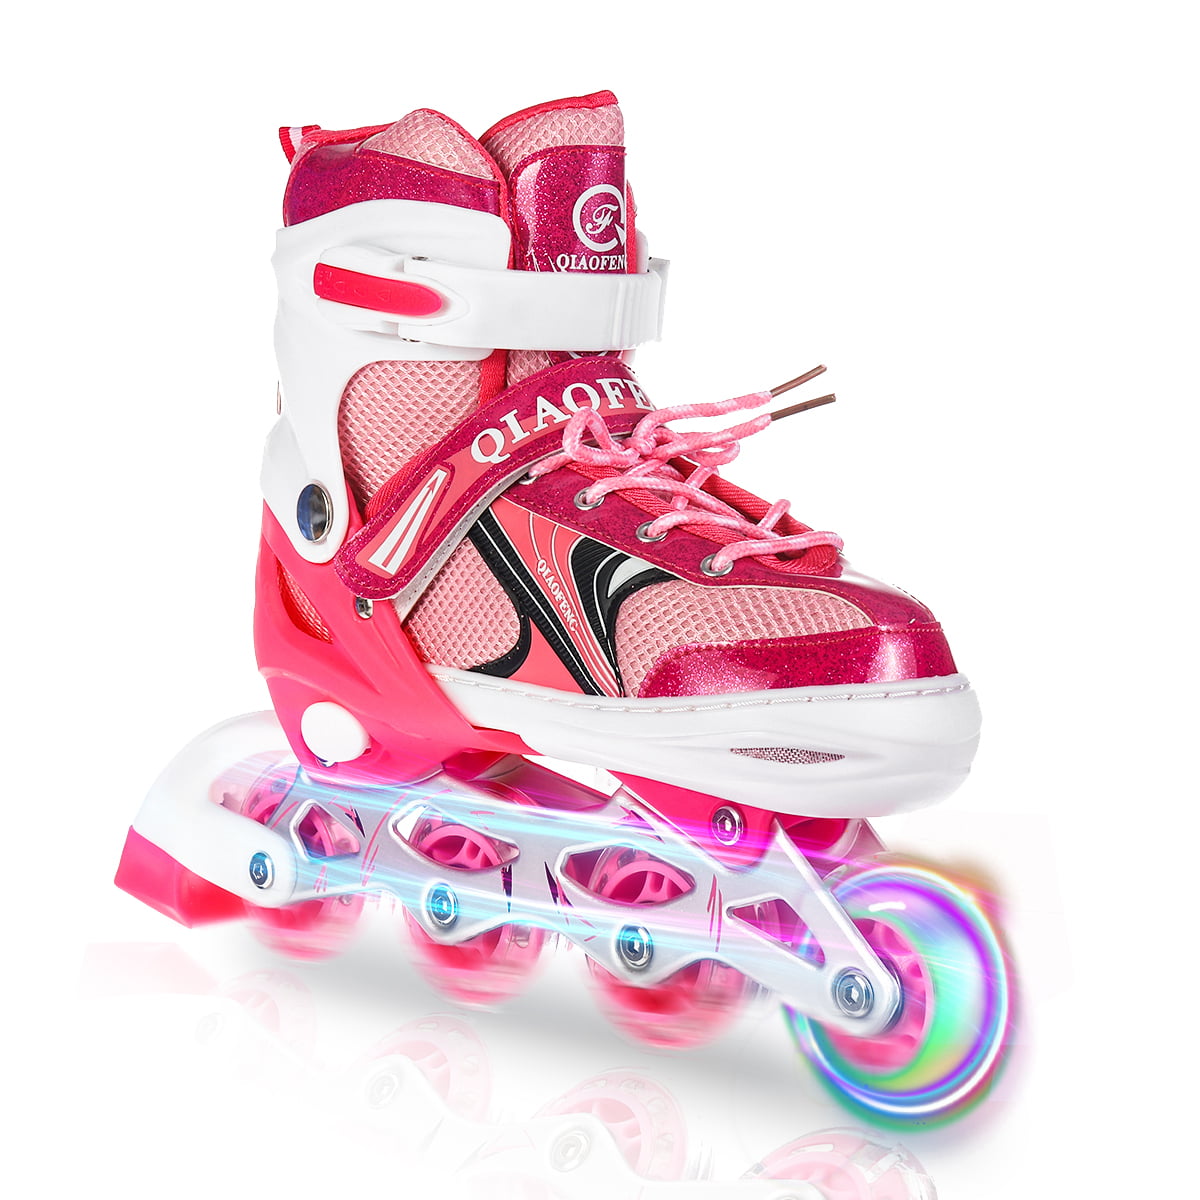 Details about   NEW Adjustable Inline Skates Roller Blades Adult Size 8-10.5 Breathable a e 97 